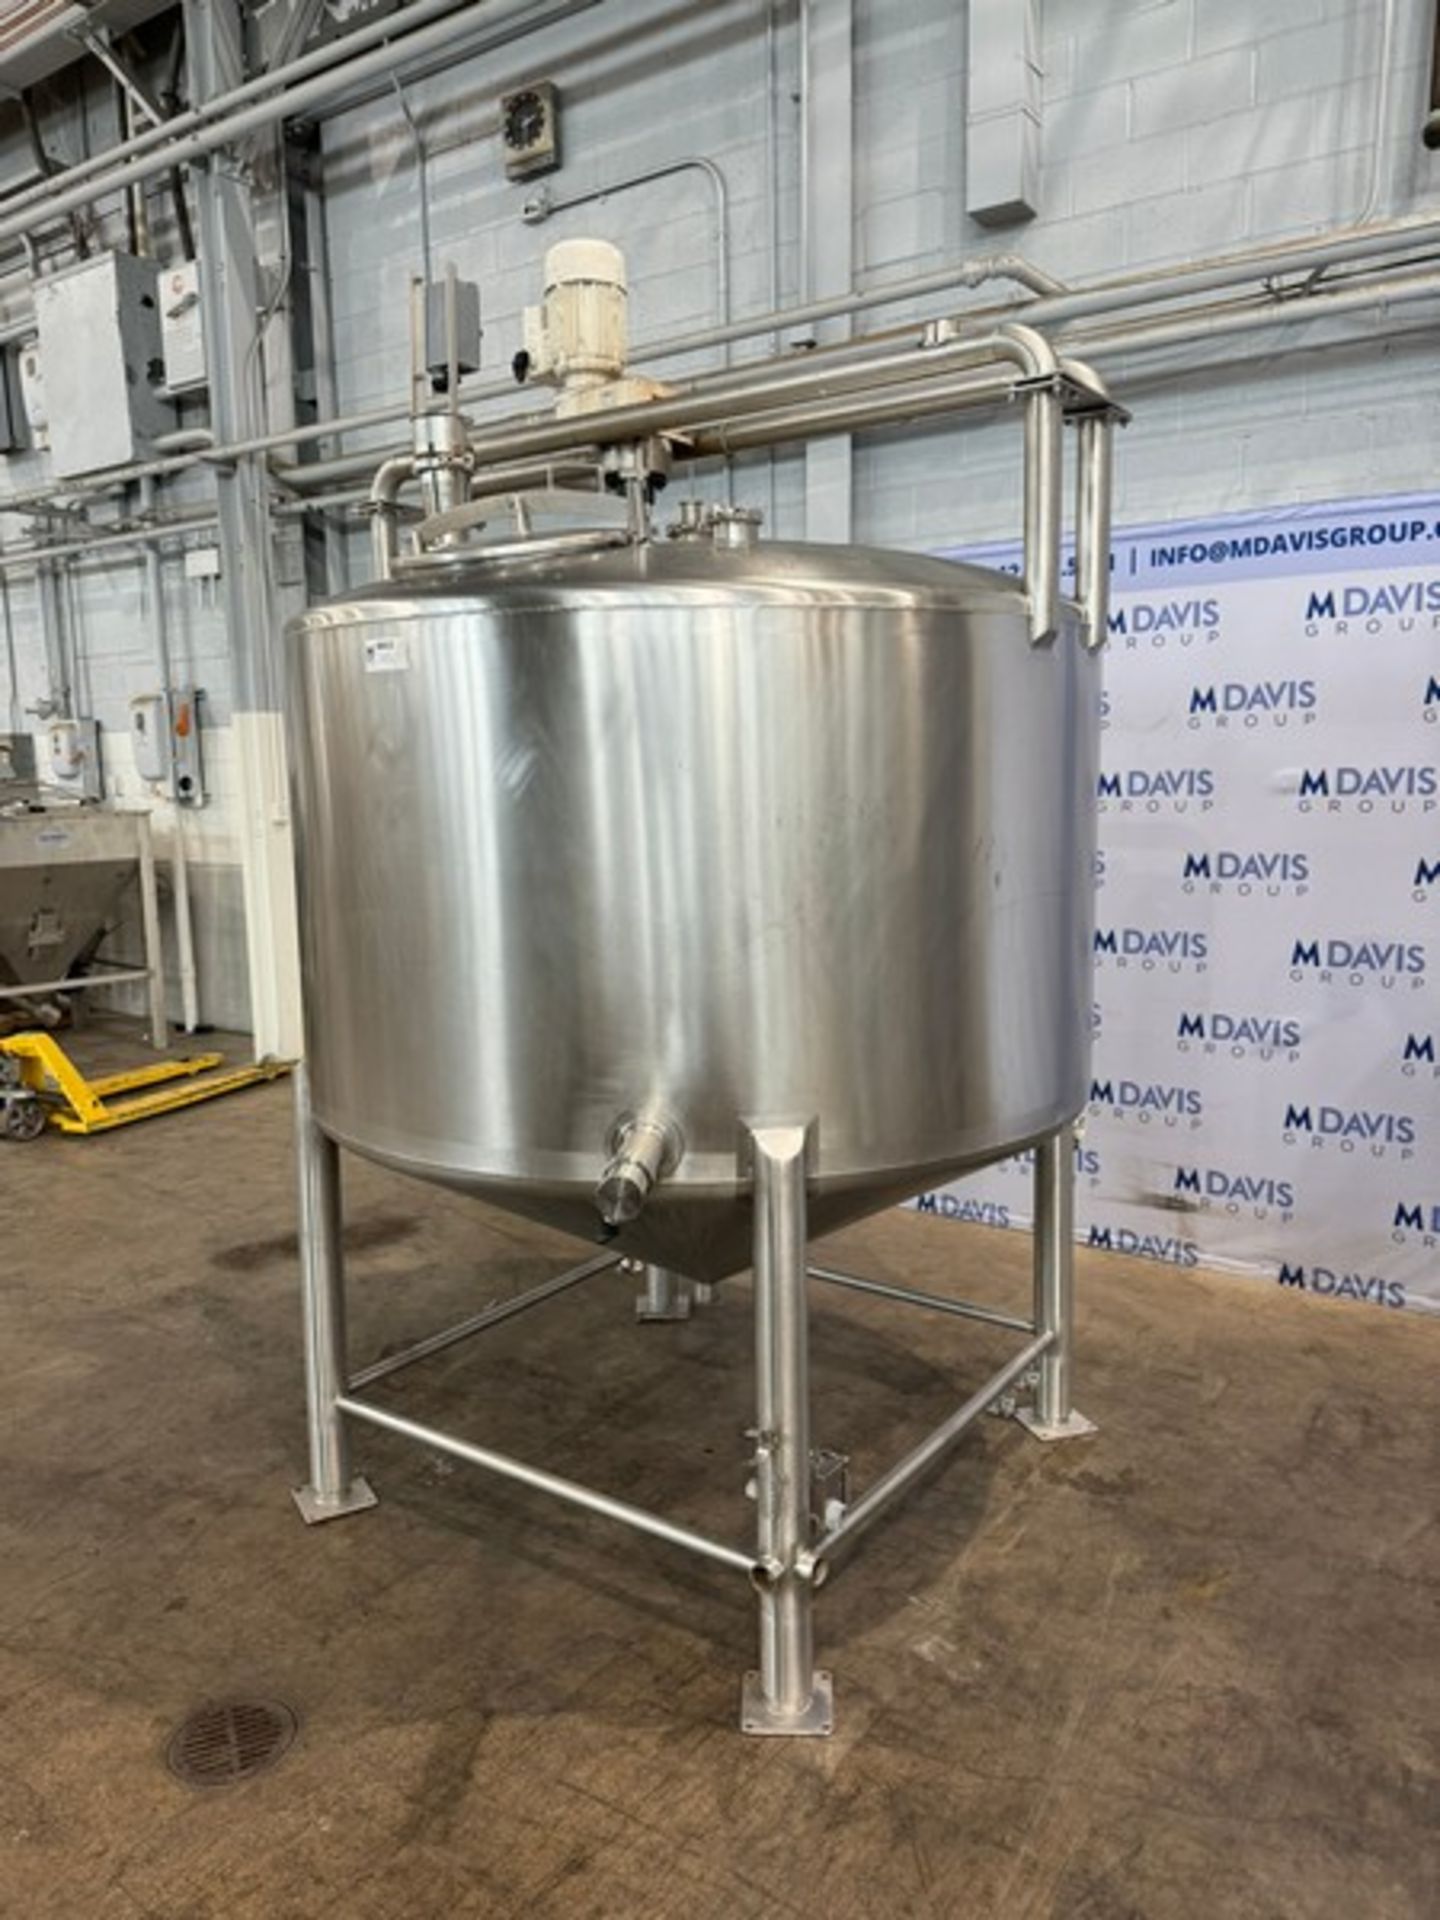 Aprox. 500 Gal. S/S Single Wall Mixing Tank, Vessel Dims.: Aprox. 36" H x 36" Dia., with Dome Top, - Image 2 of 15